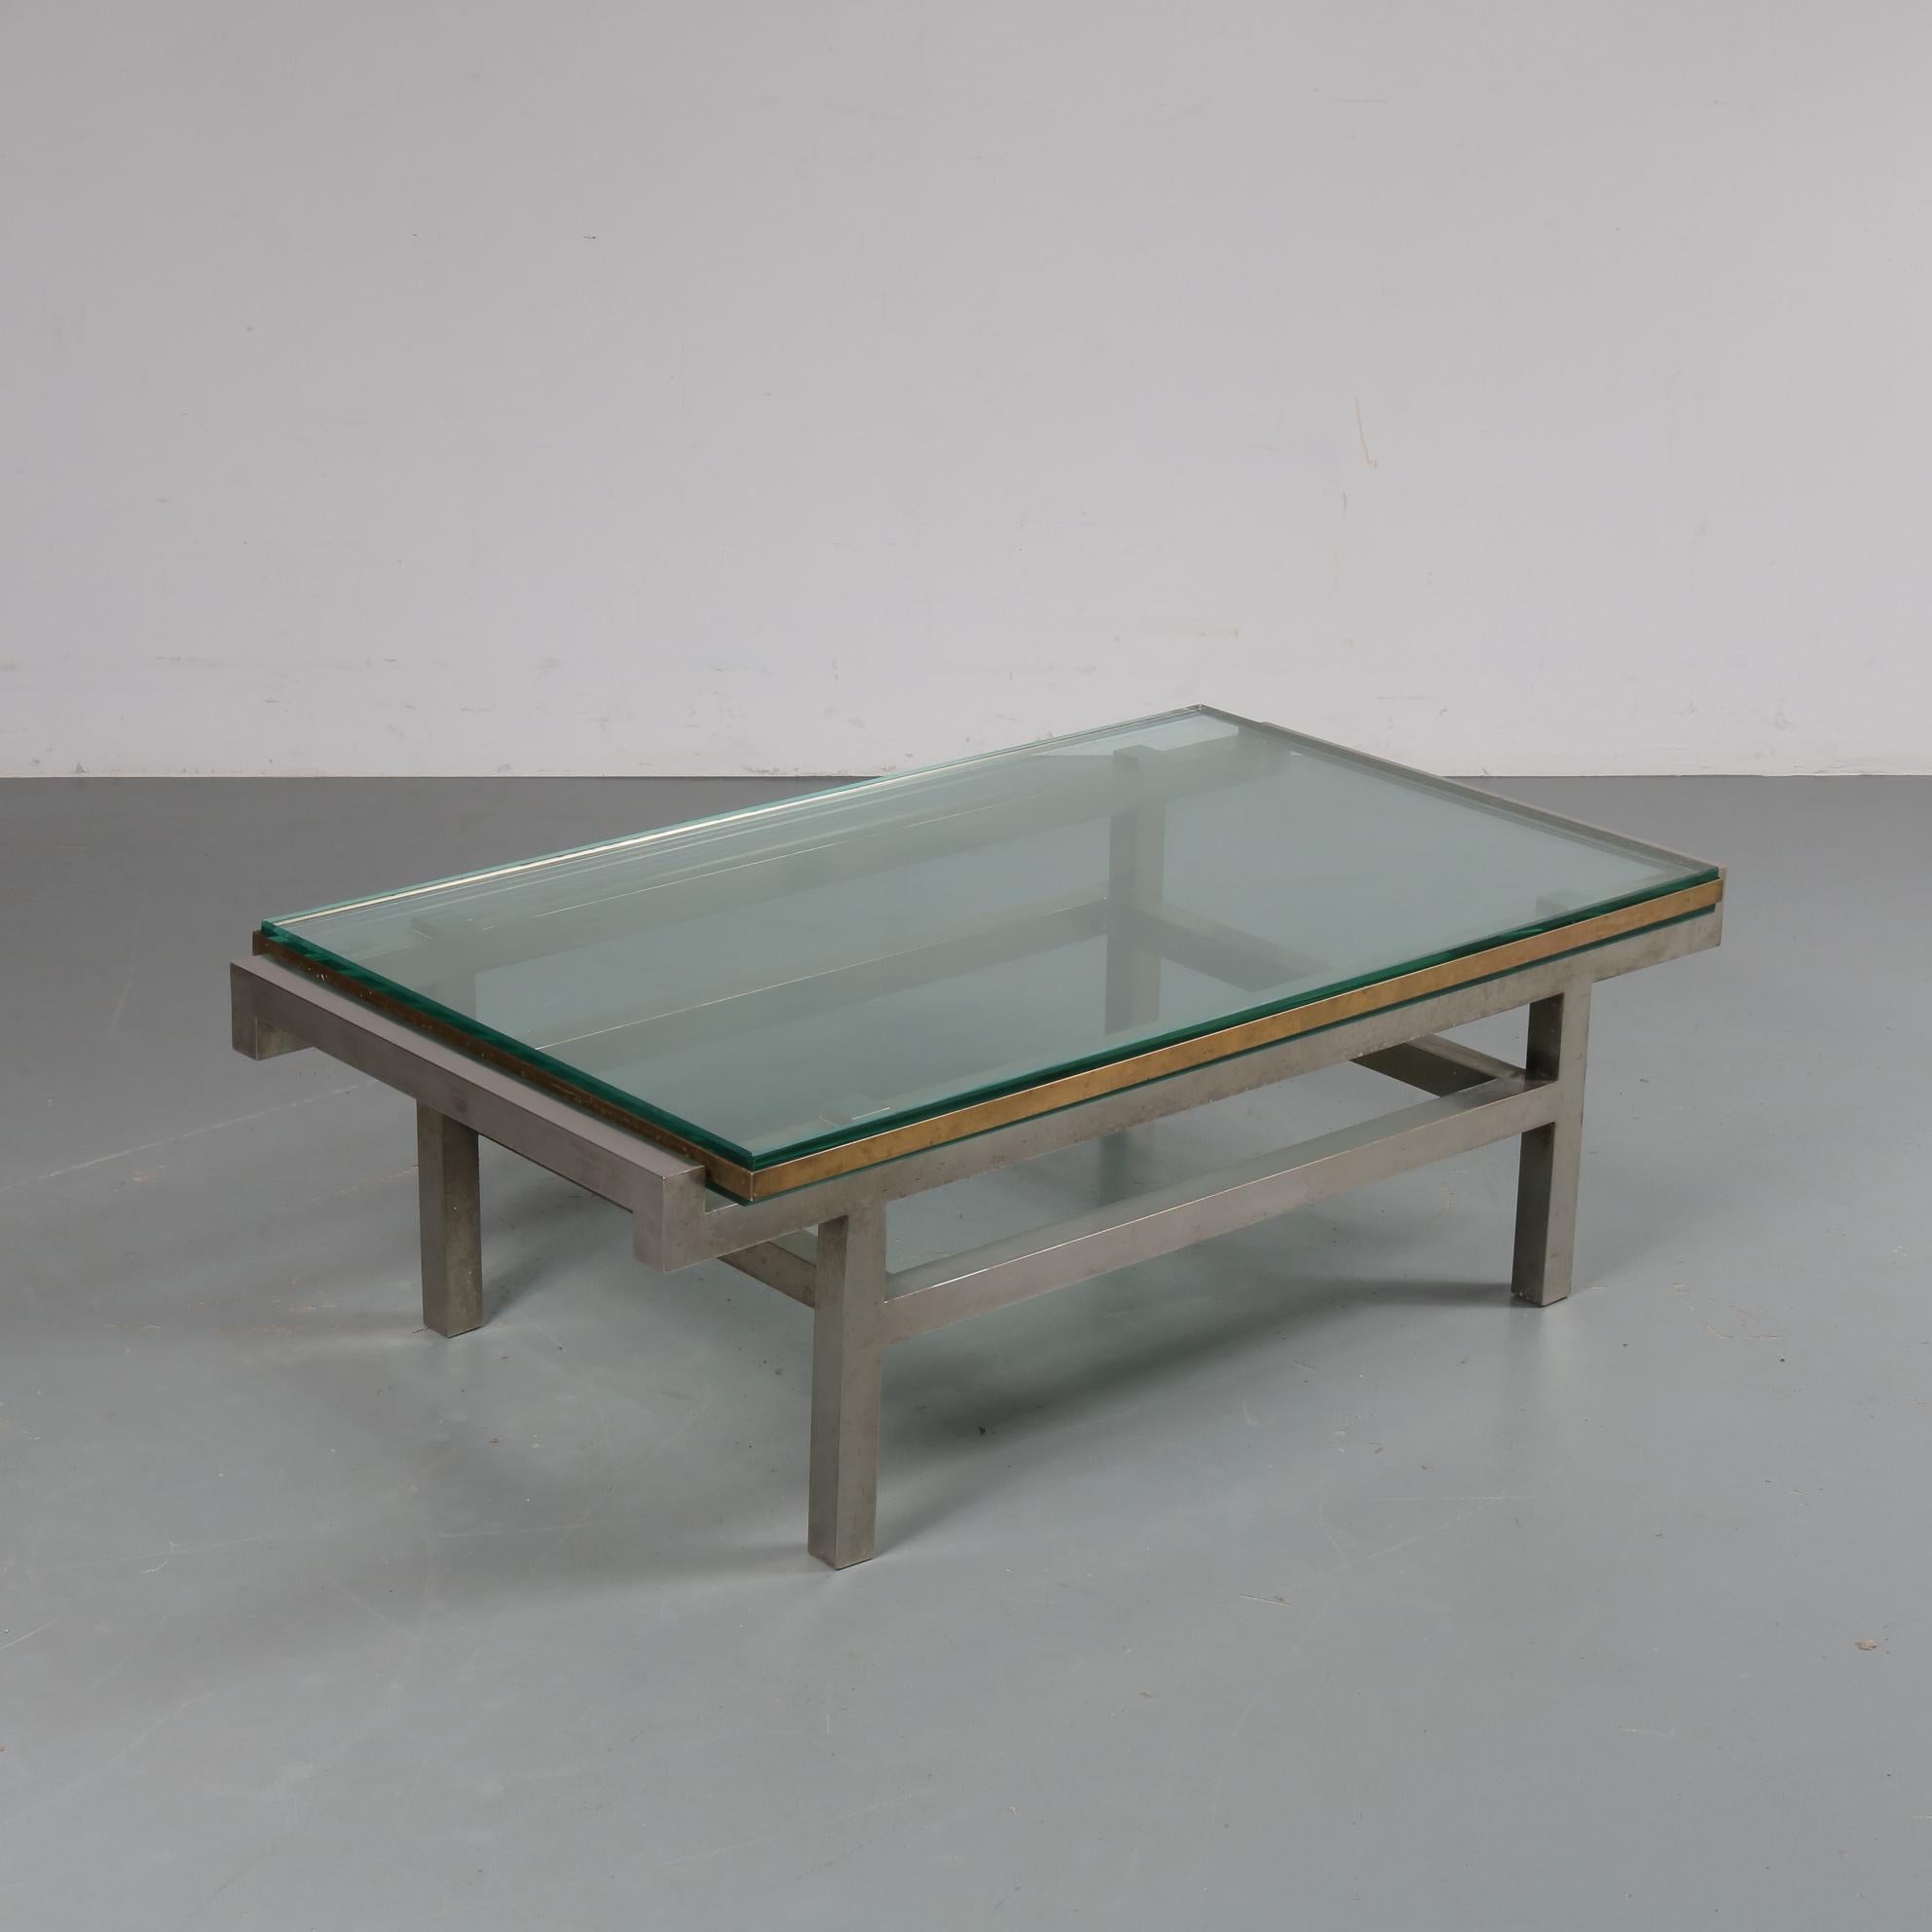 A beautiful modernist coffee table manufactured in France, circa 1960.

This very appealing piece is made of high quality grey steel in quare shapes, holding a rectangular clear glass top with golden colored glass edges and a second glass layer